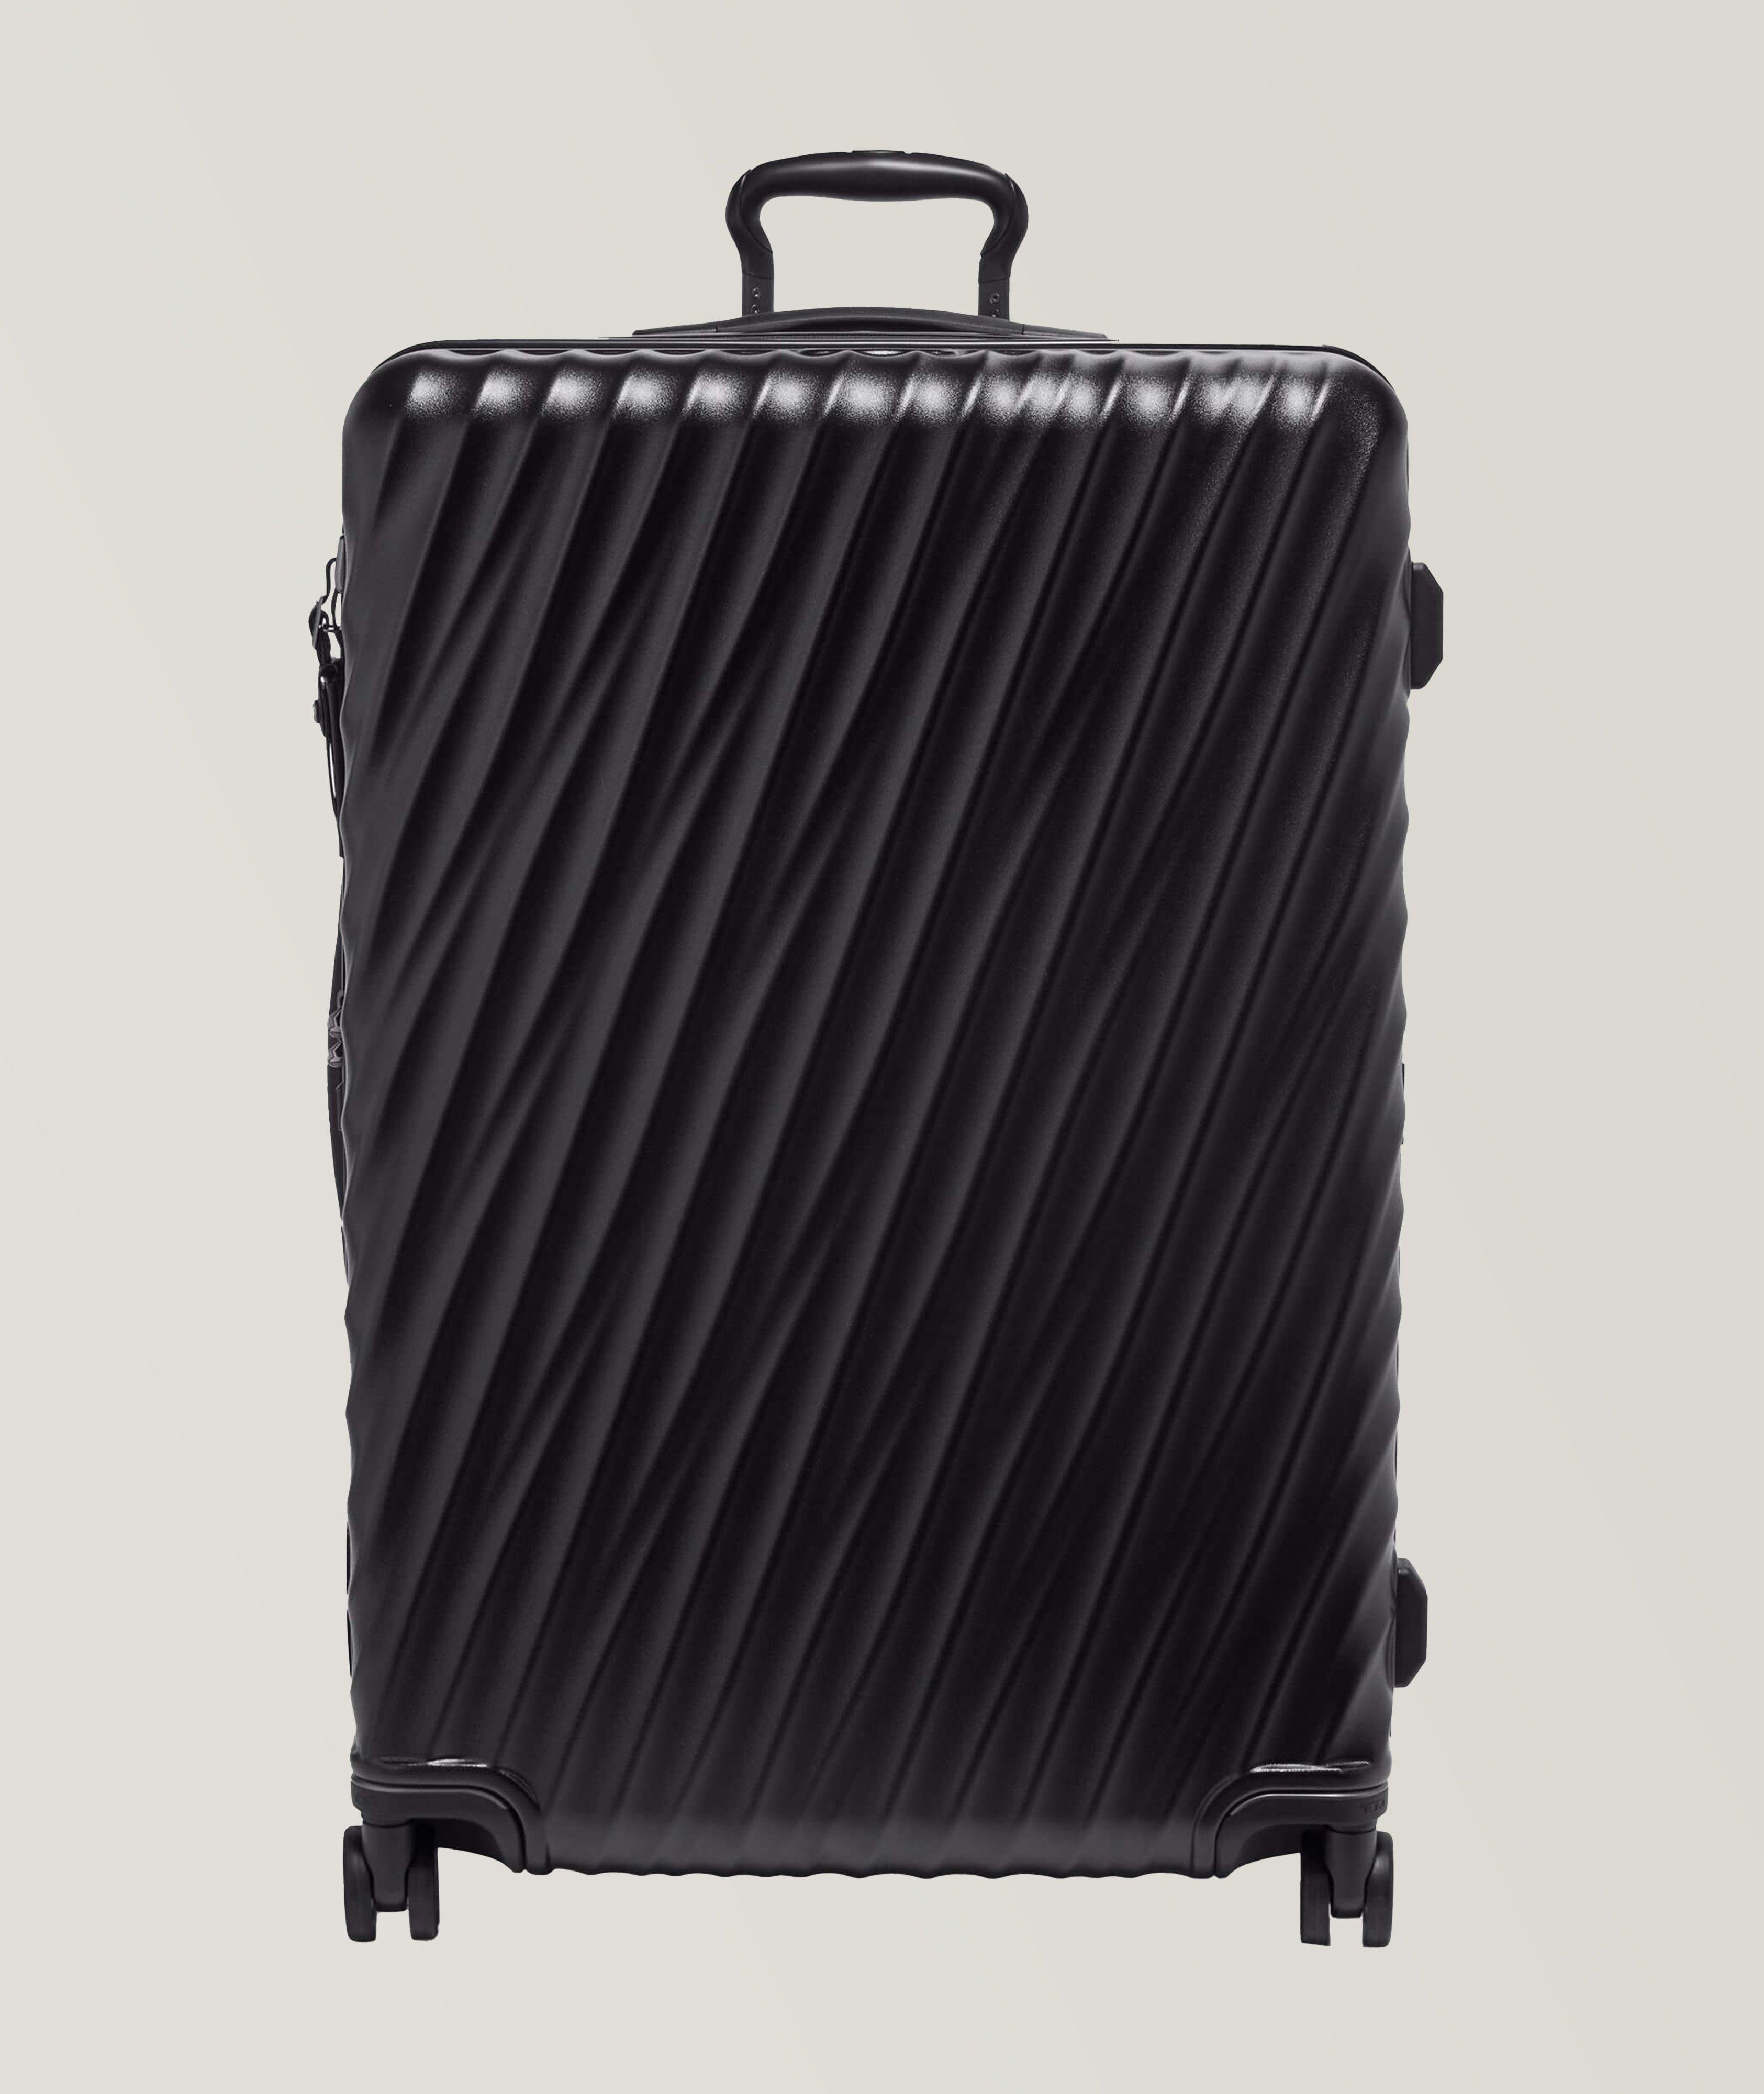 19 Degree Extended Trip Expandable Checked Luggage  image 0